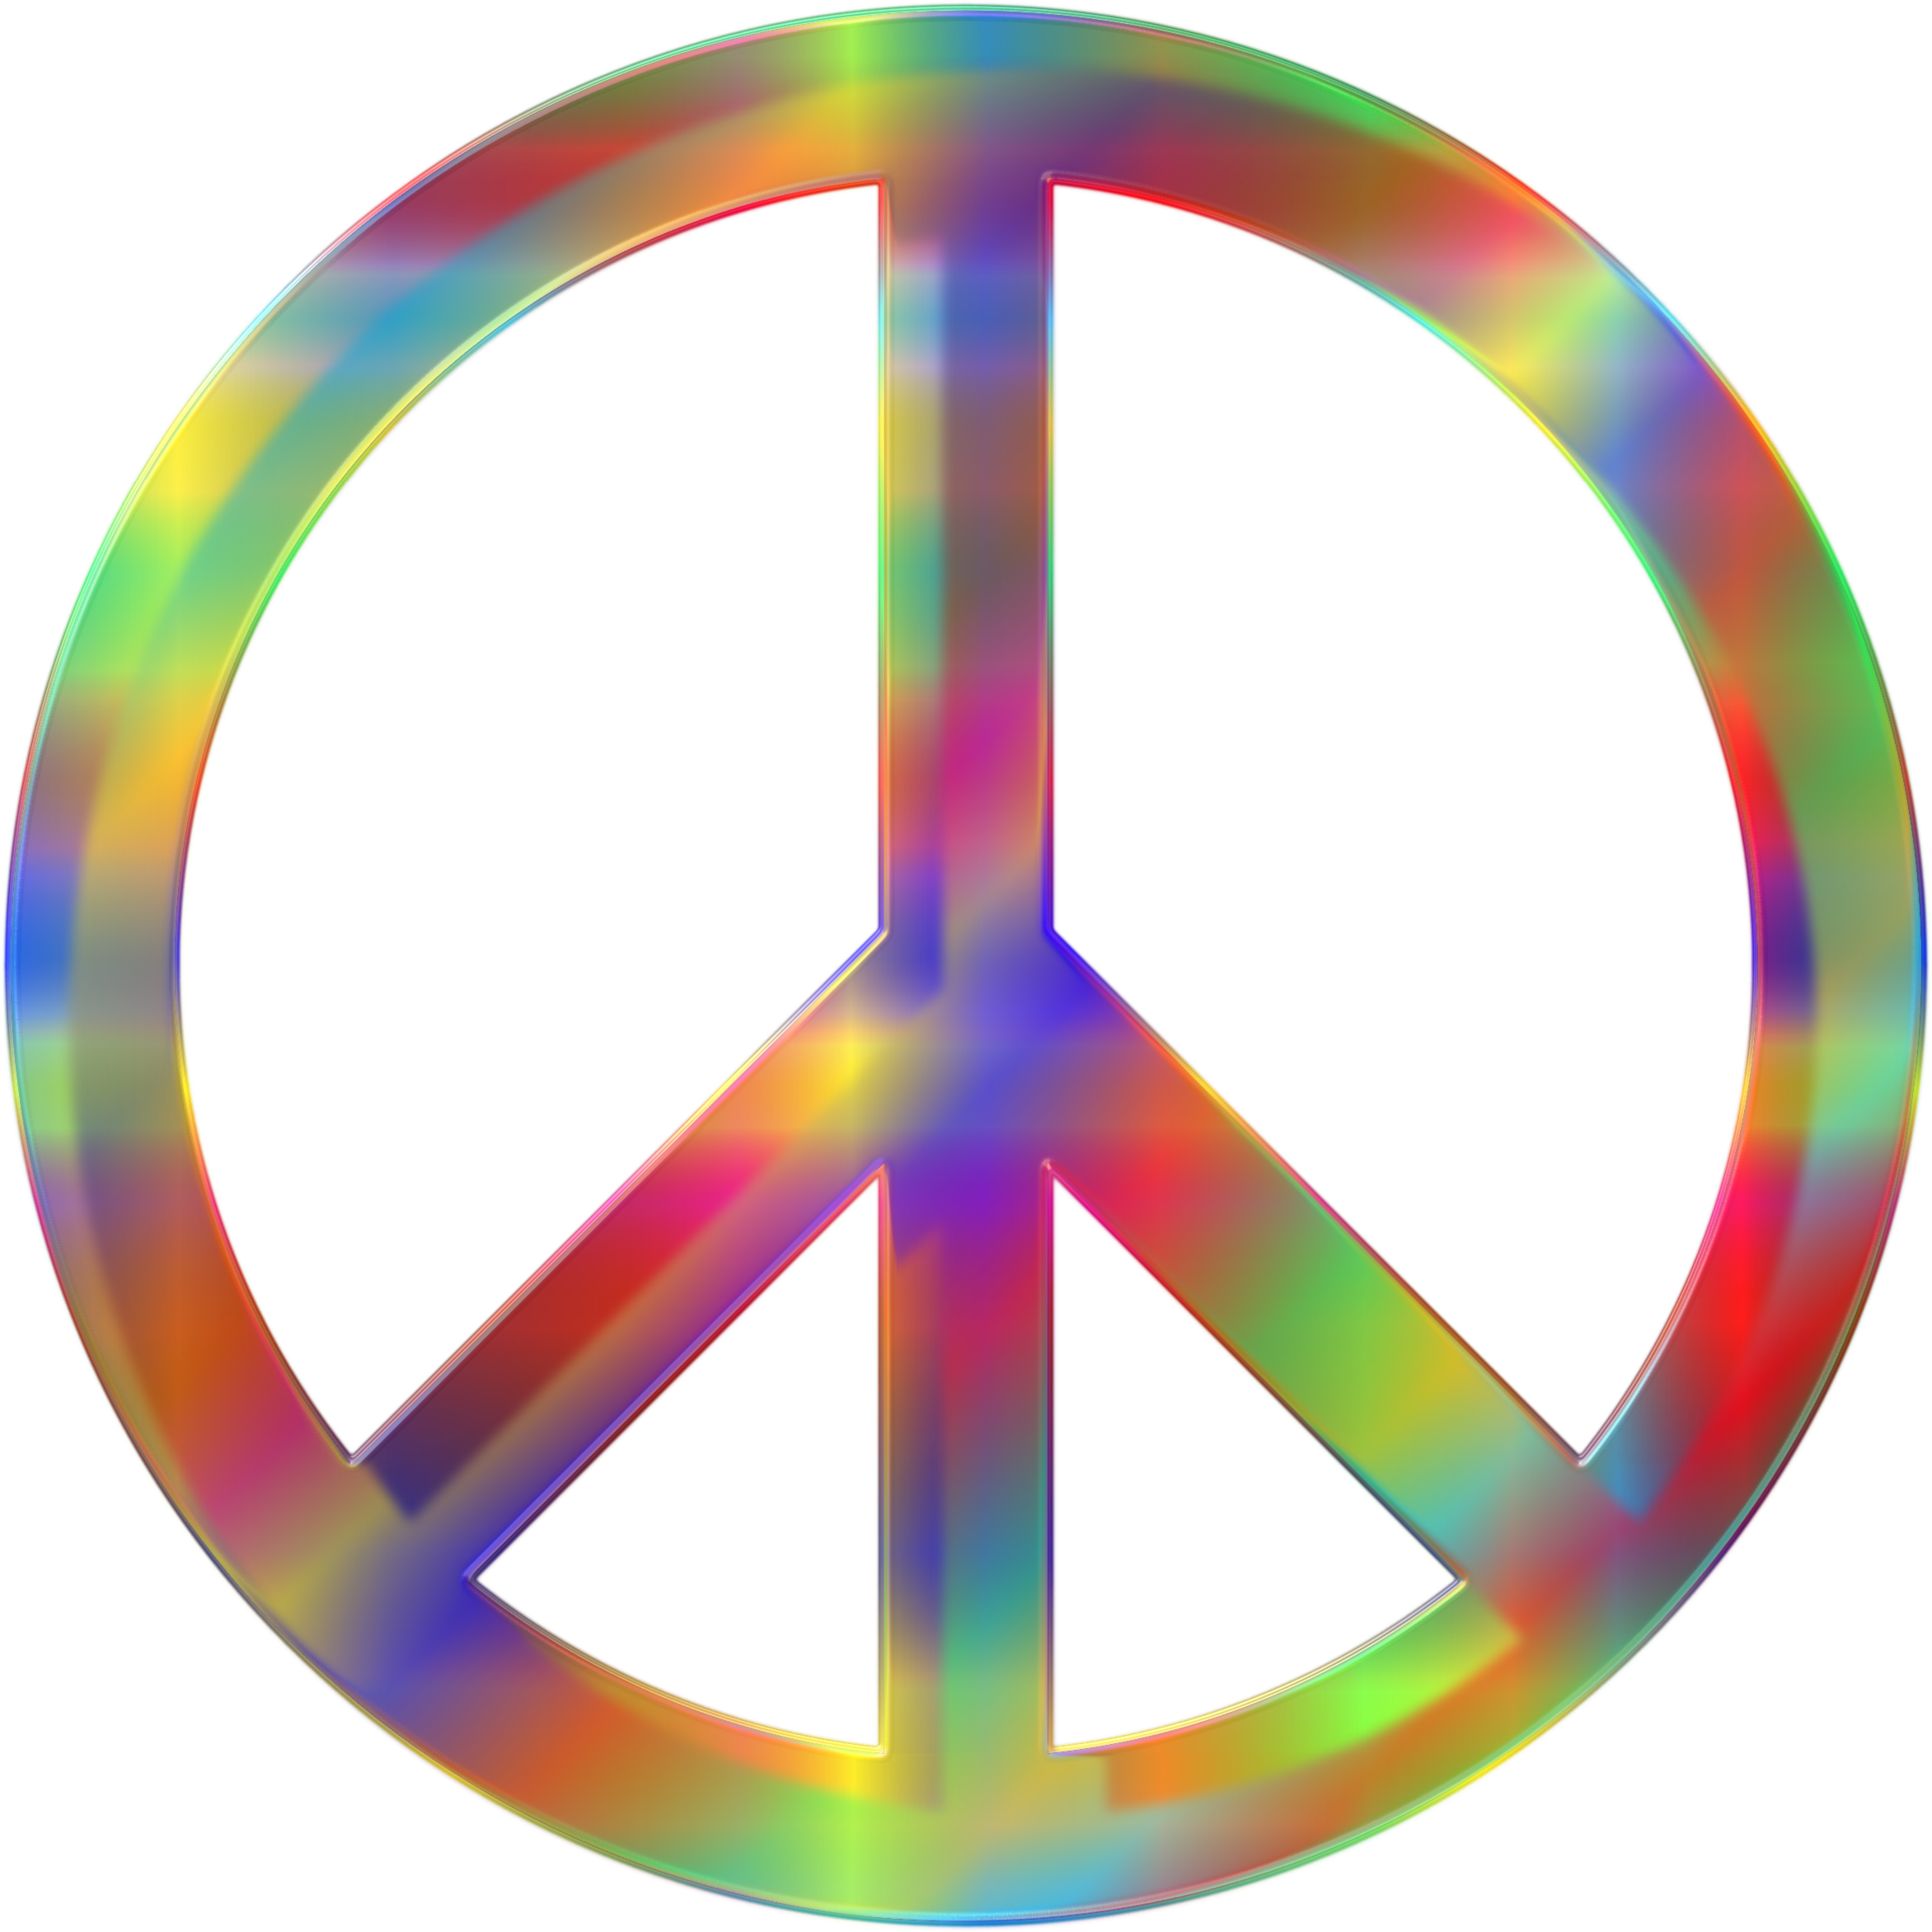 Images Of Peace Signs